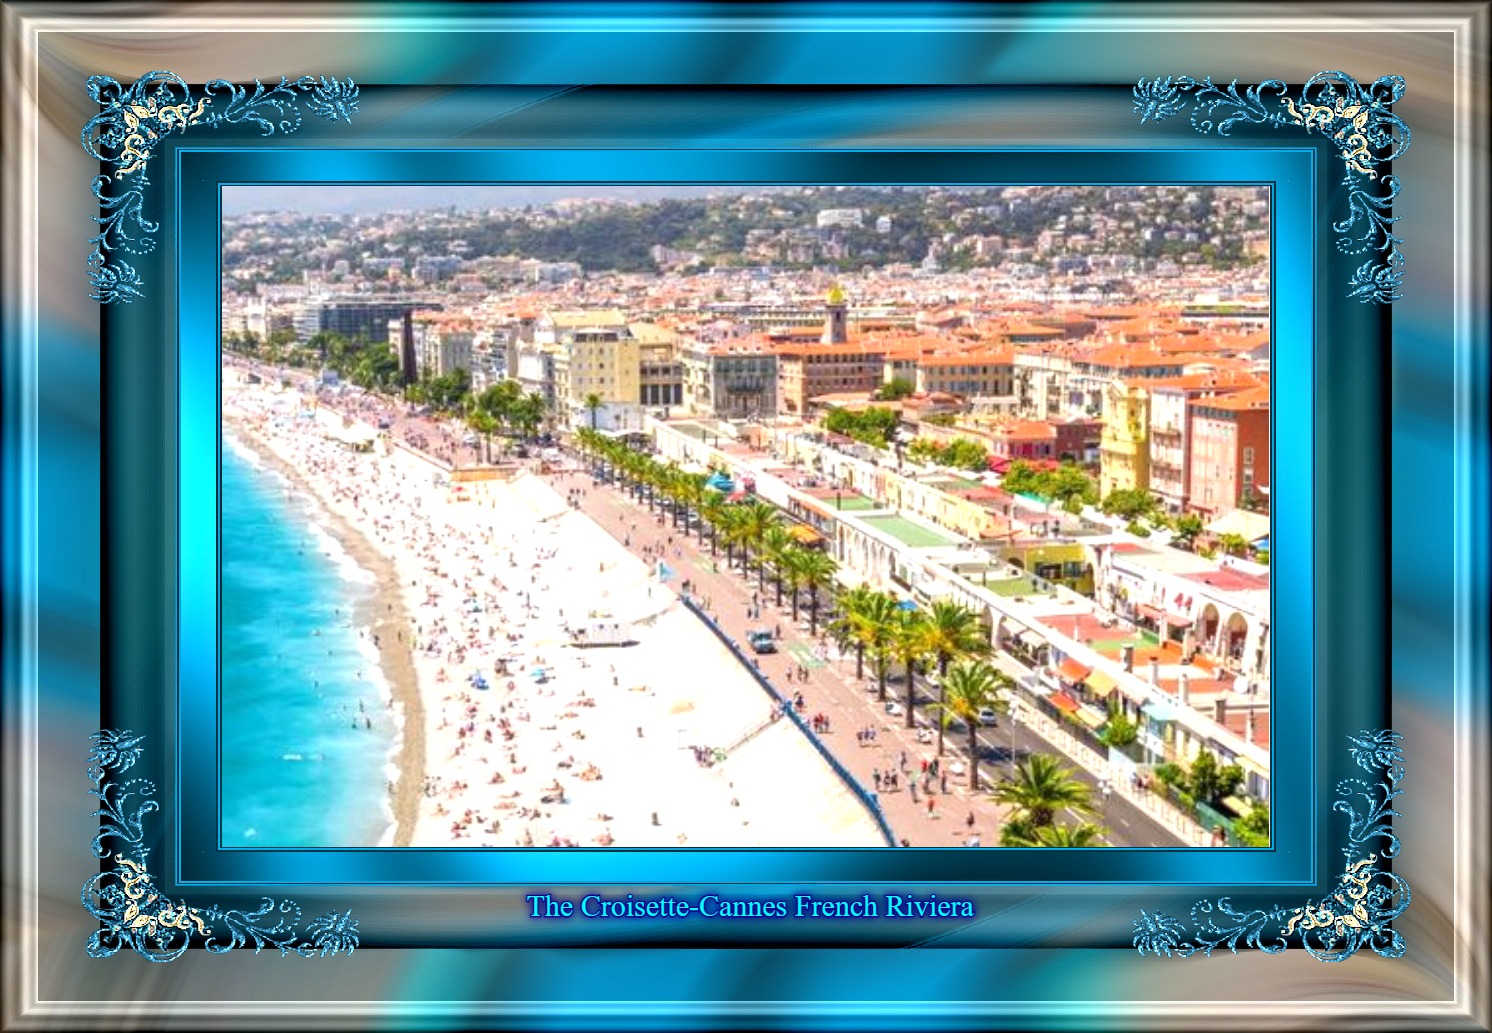 You are currently viewing “Cannes-A City of Fun Frivolity & Festivals”- 02